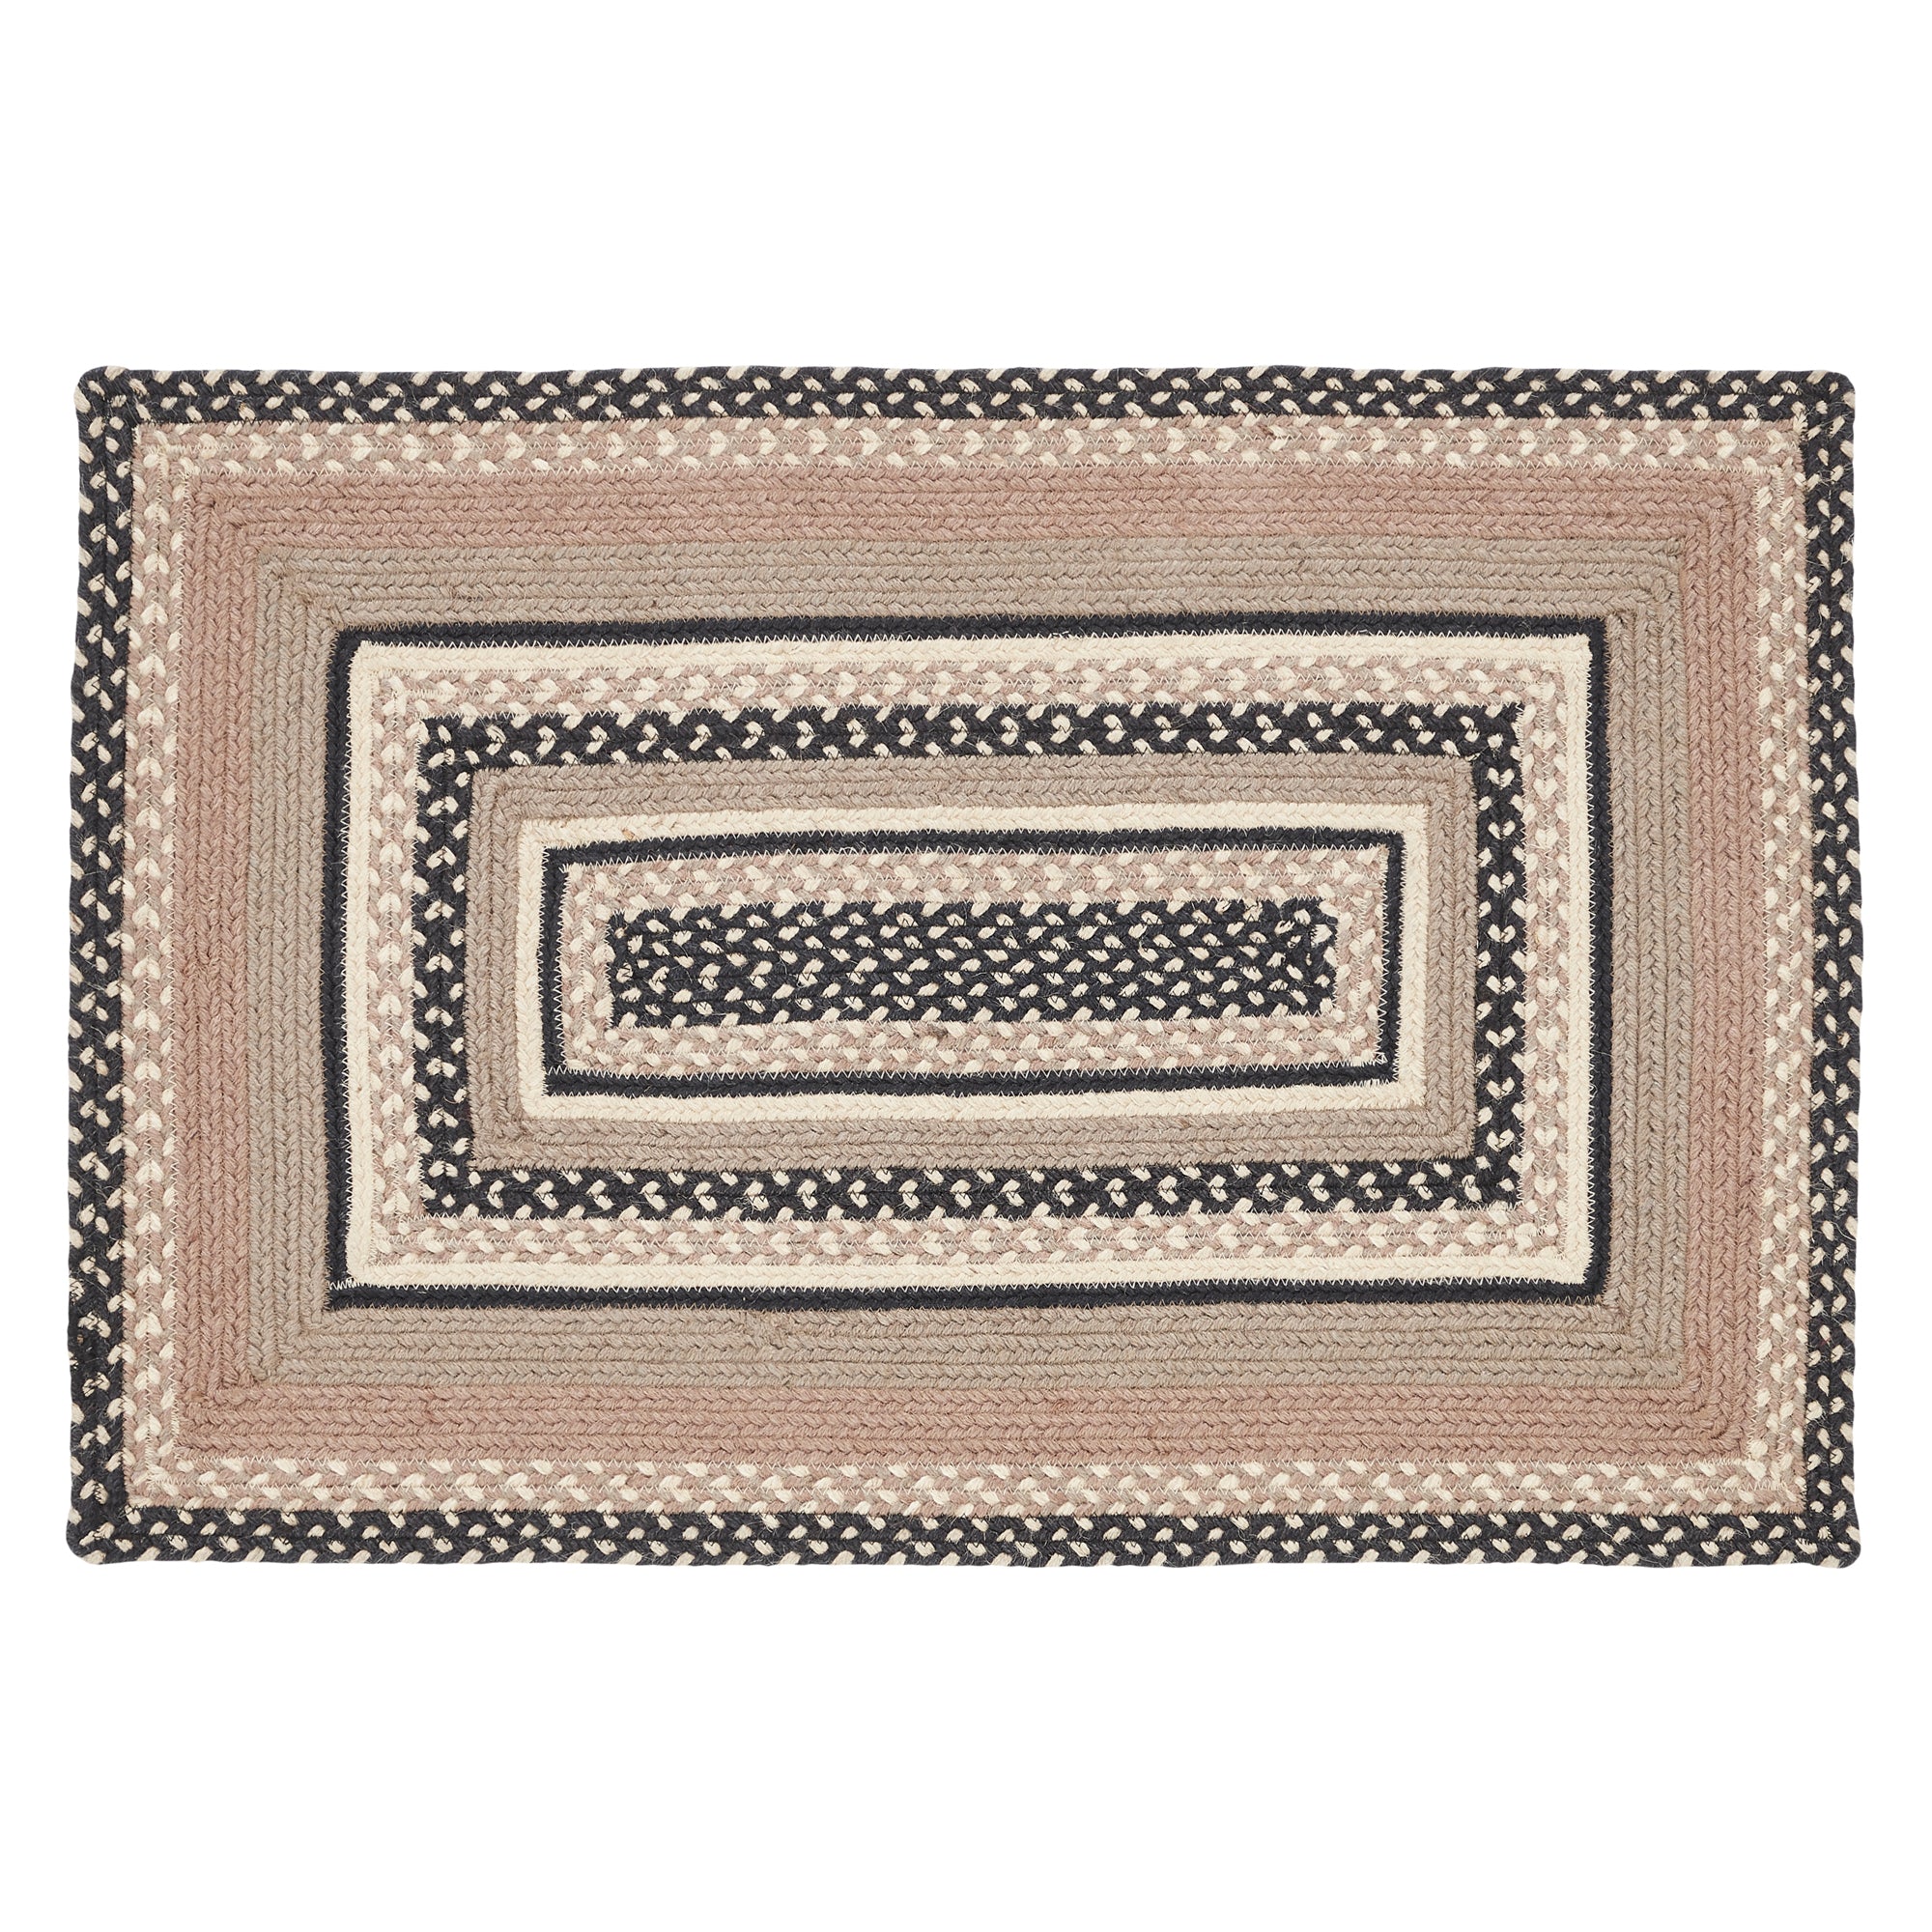 Sawyer Mill Charcoal Creme Jute Braided Rug Rect w/ Pad 2'x3' VHC Brands